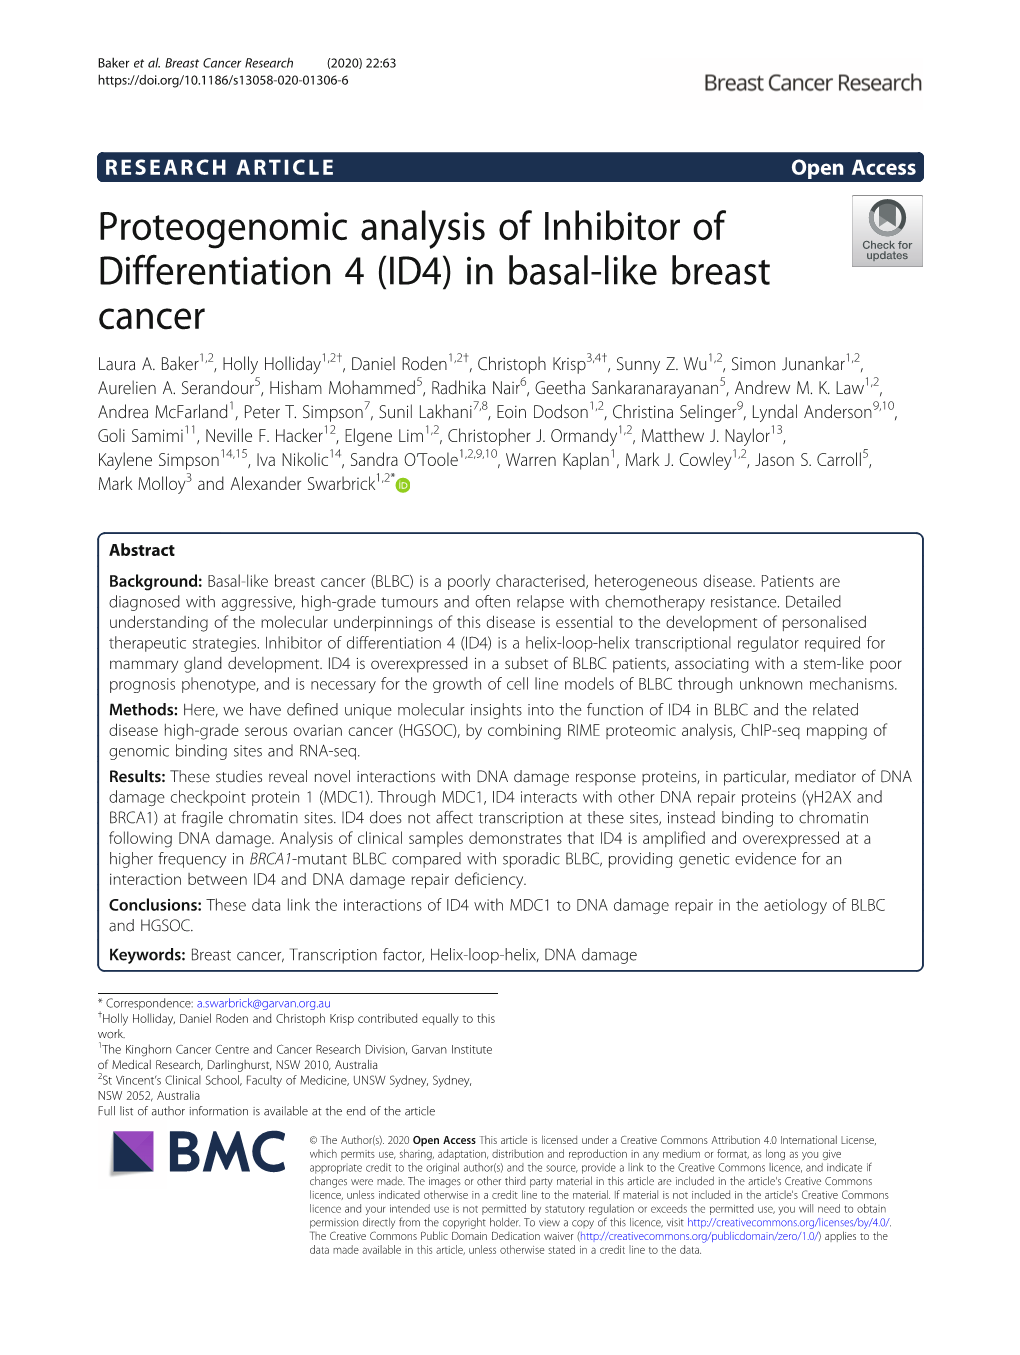 Proteogenomic Analysis of Inhibitor of Differentiation 4 (ID4) in Basal-Like Breast Cancer Laura A